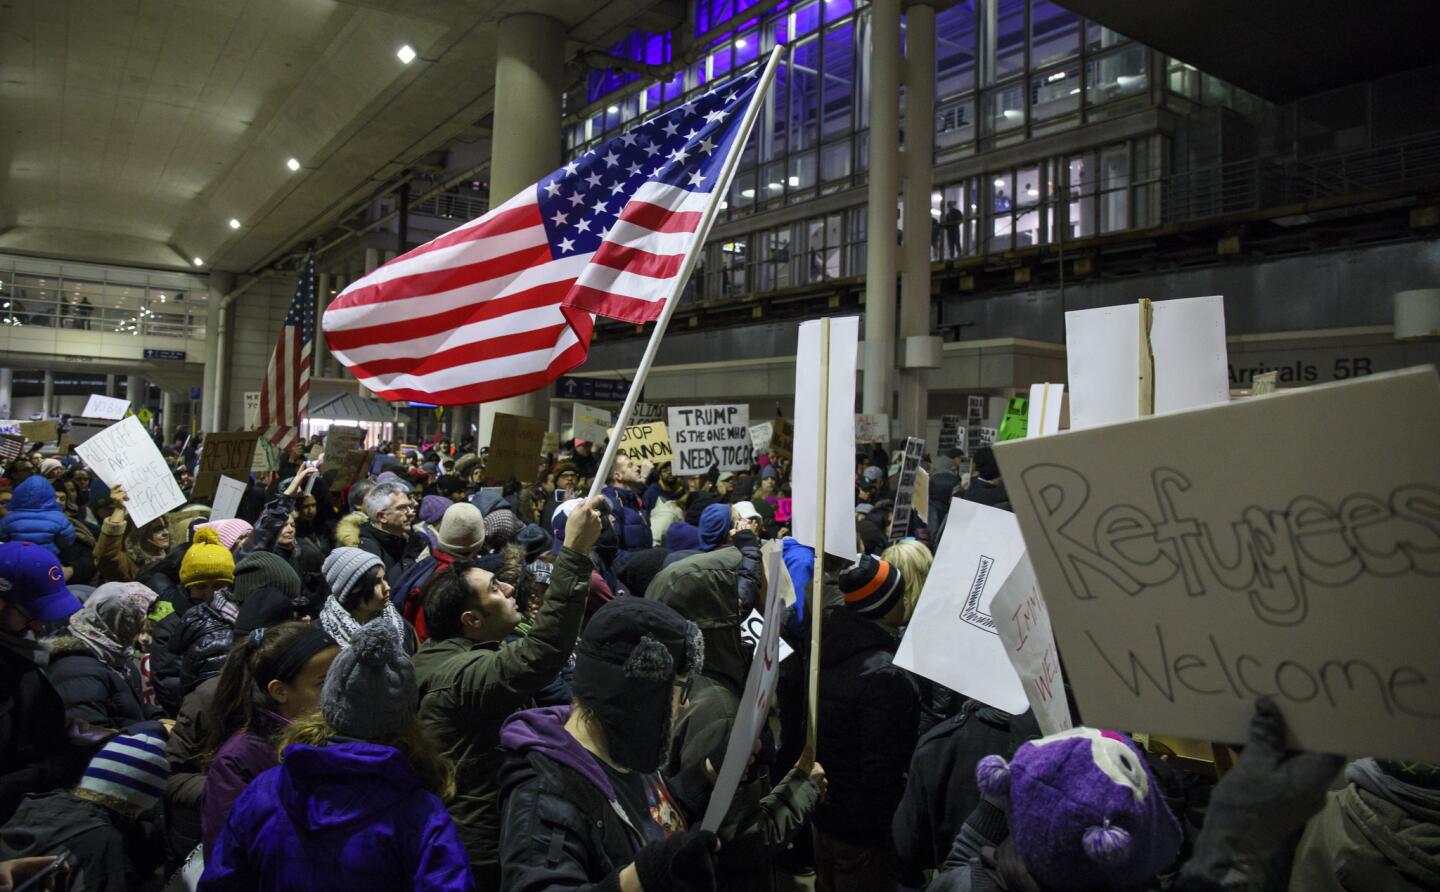 Protests at O'Hare